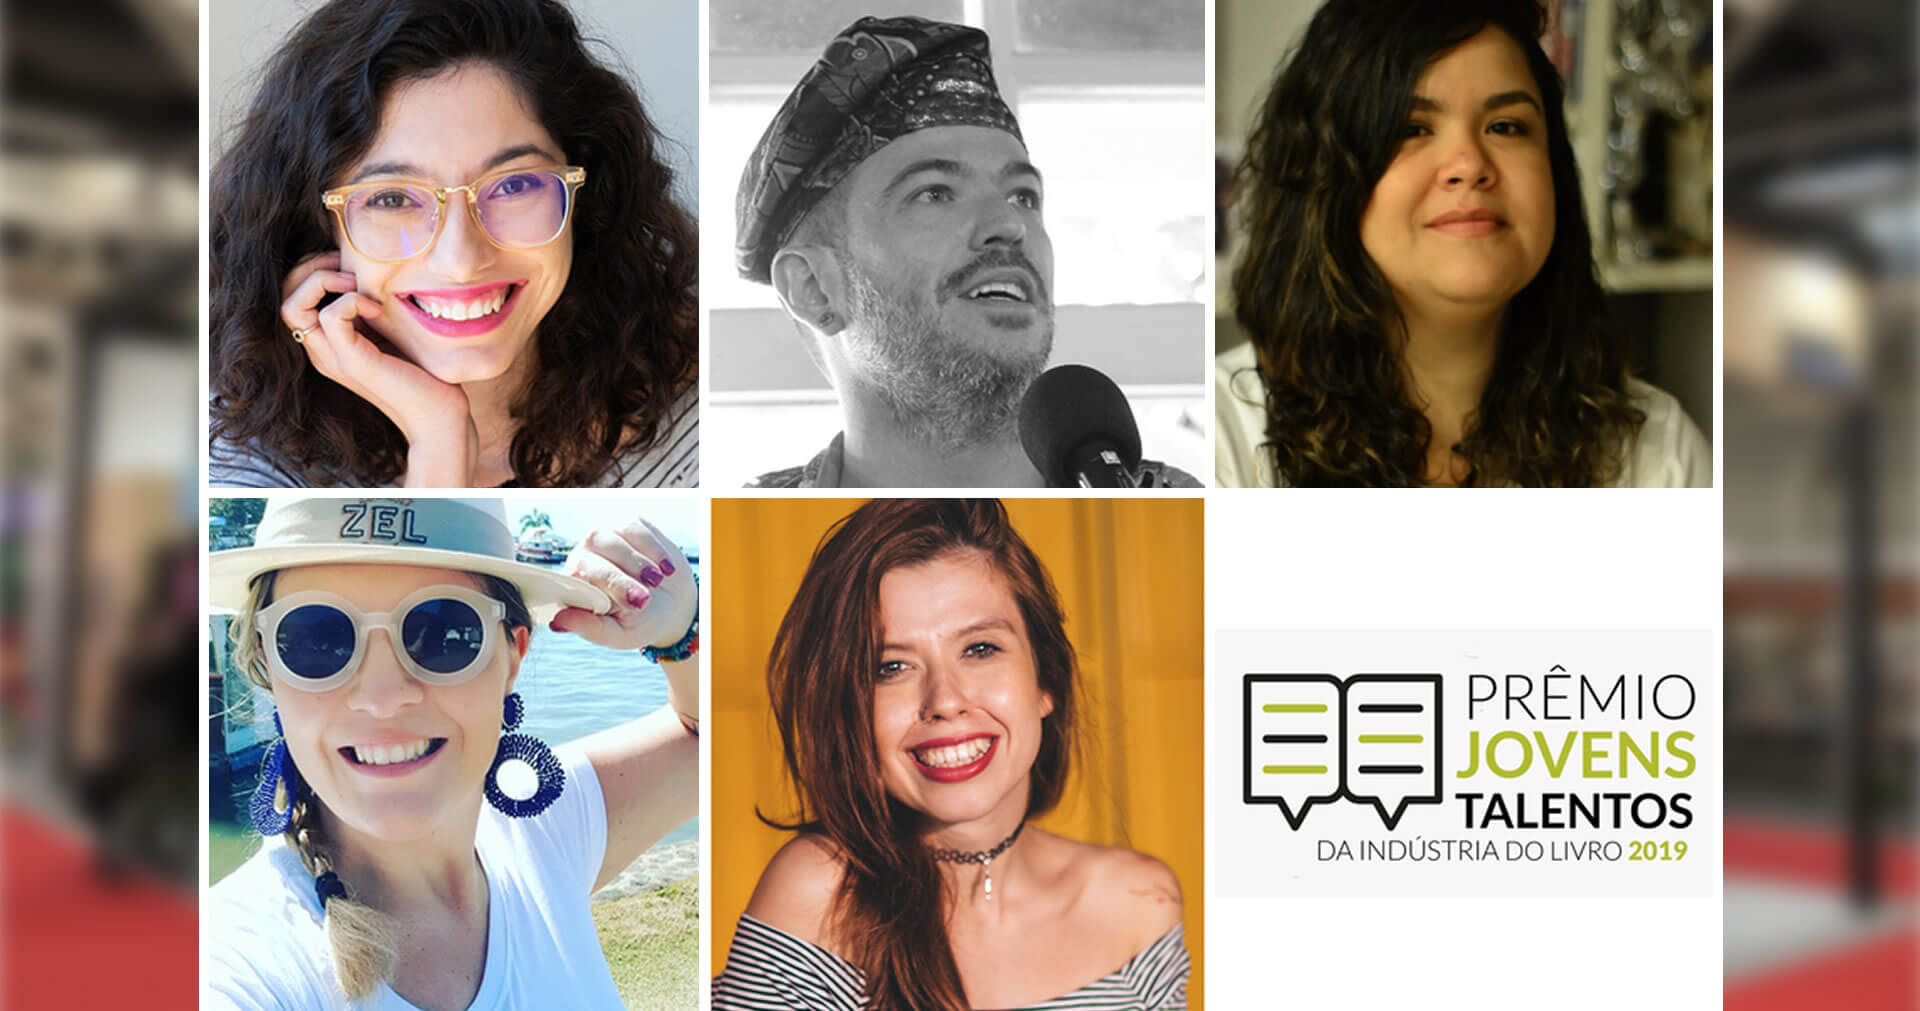 Desvendando Exu | The PublishNewsYoung Talent Award presents professionals representing the renewal of the book market and the future of this industry.